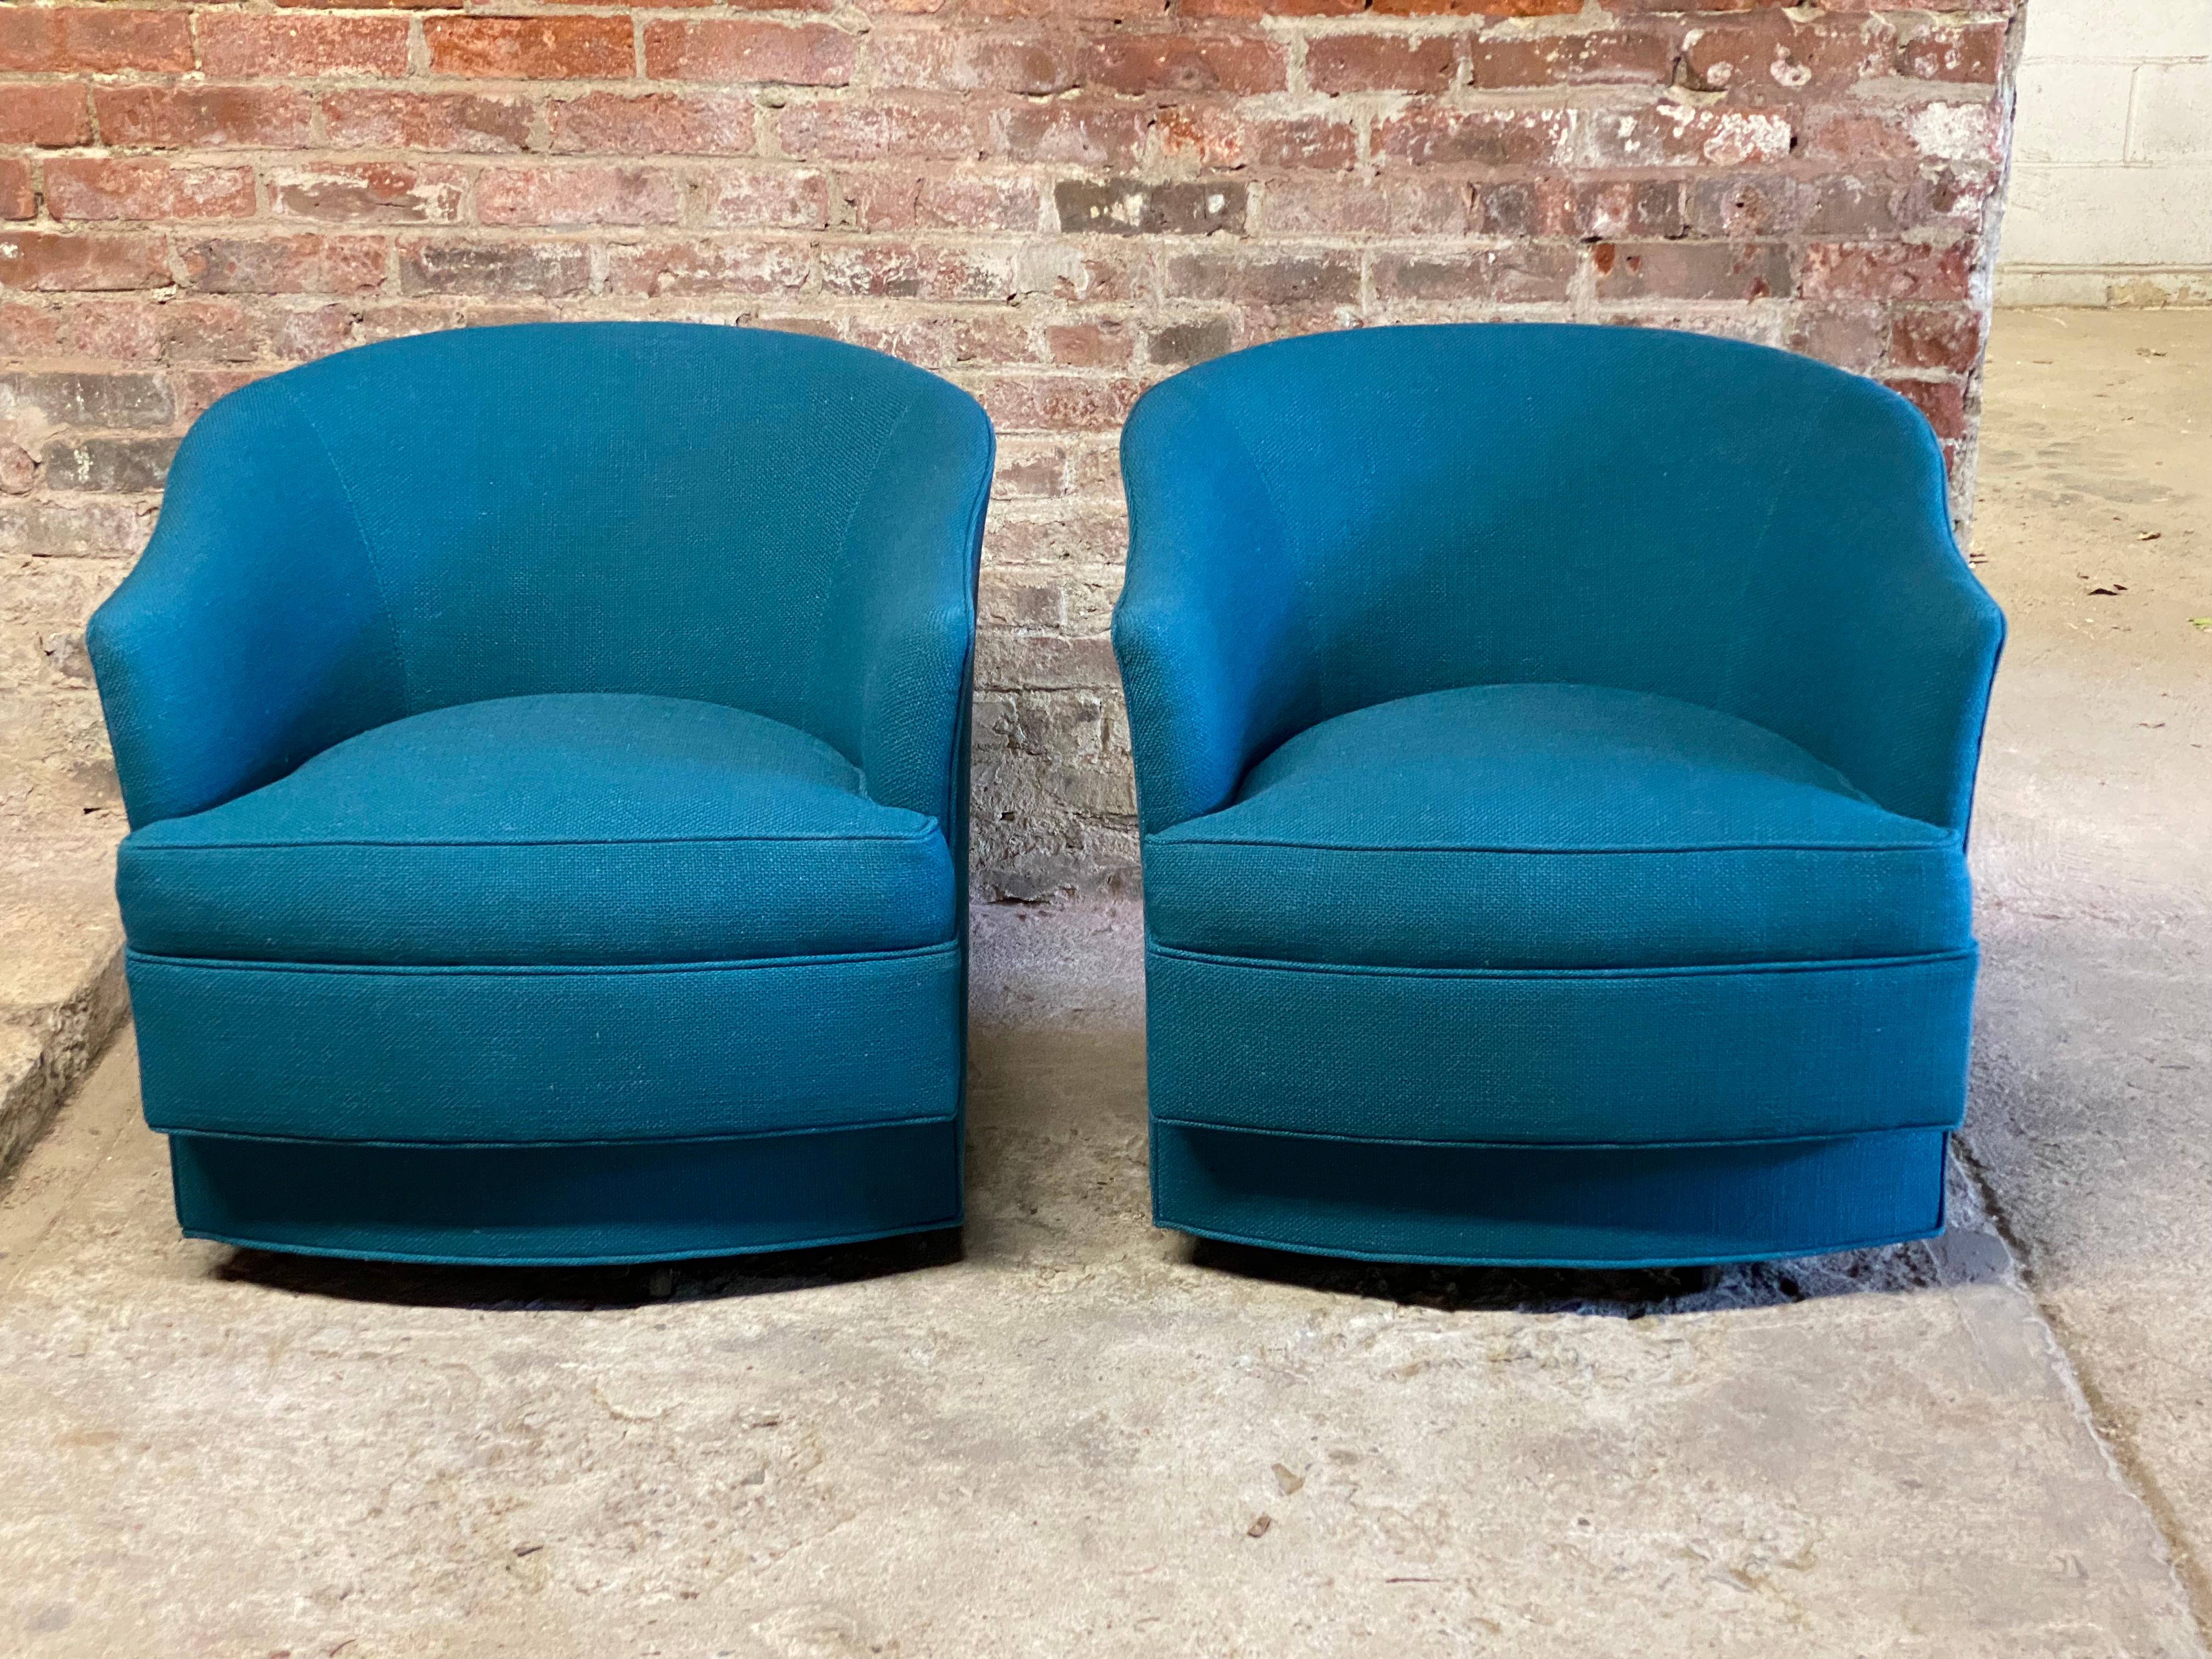 Pair of elegant John Stuart swivel chairs. The John Stuart label on any piece of furniture is a distinct sign of luxury, detail to design and quality in 20th century furniture manufacturing. Reupholstered in a heavy duty teal fabric. Good overall